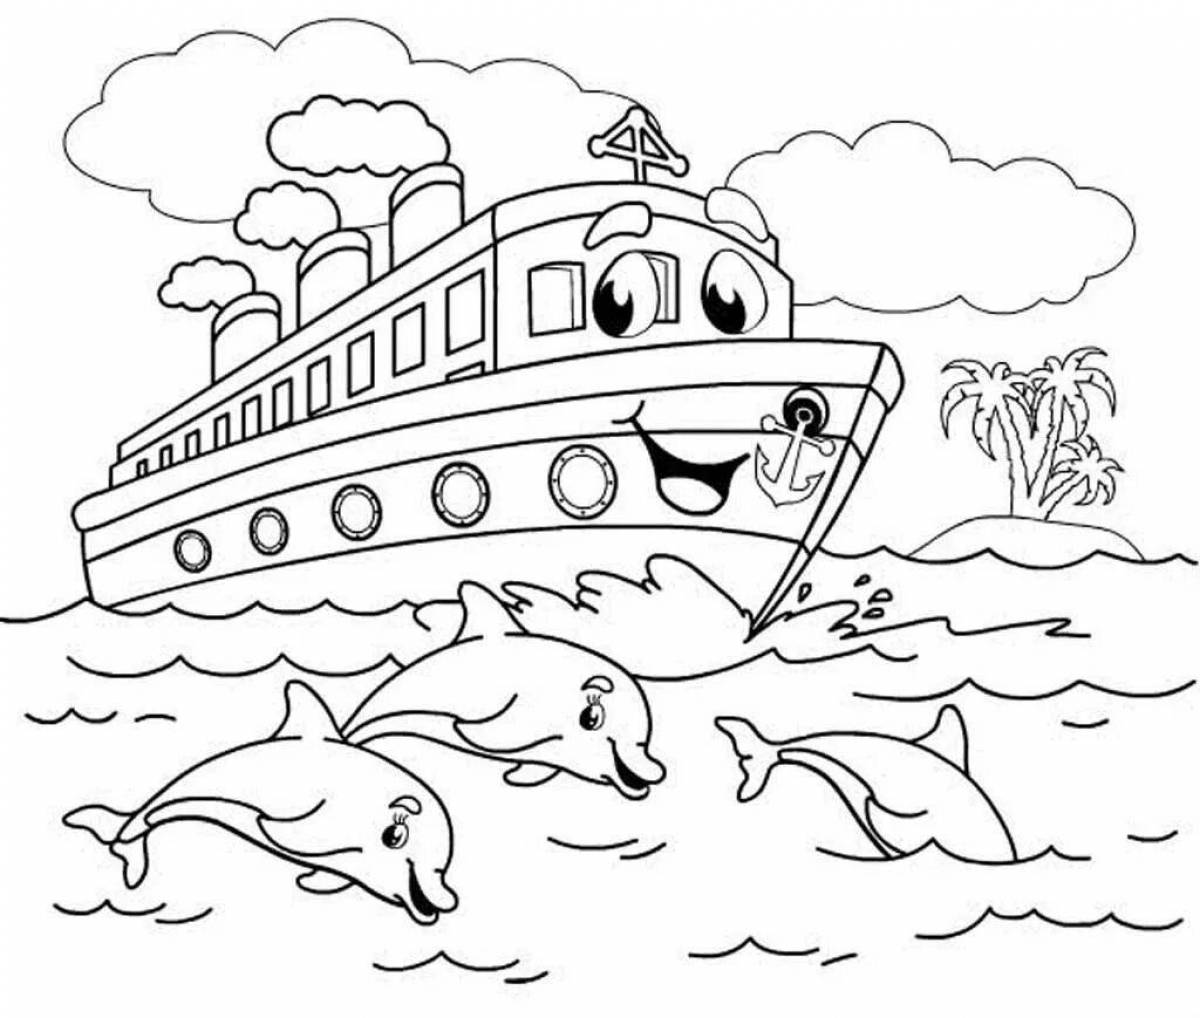 Fun water transport coloring book for 5-6 year olds